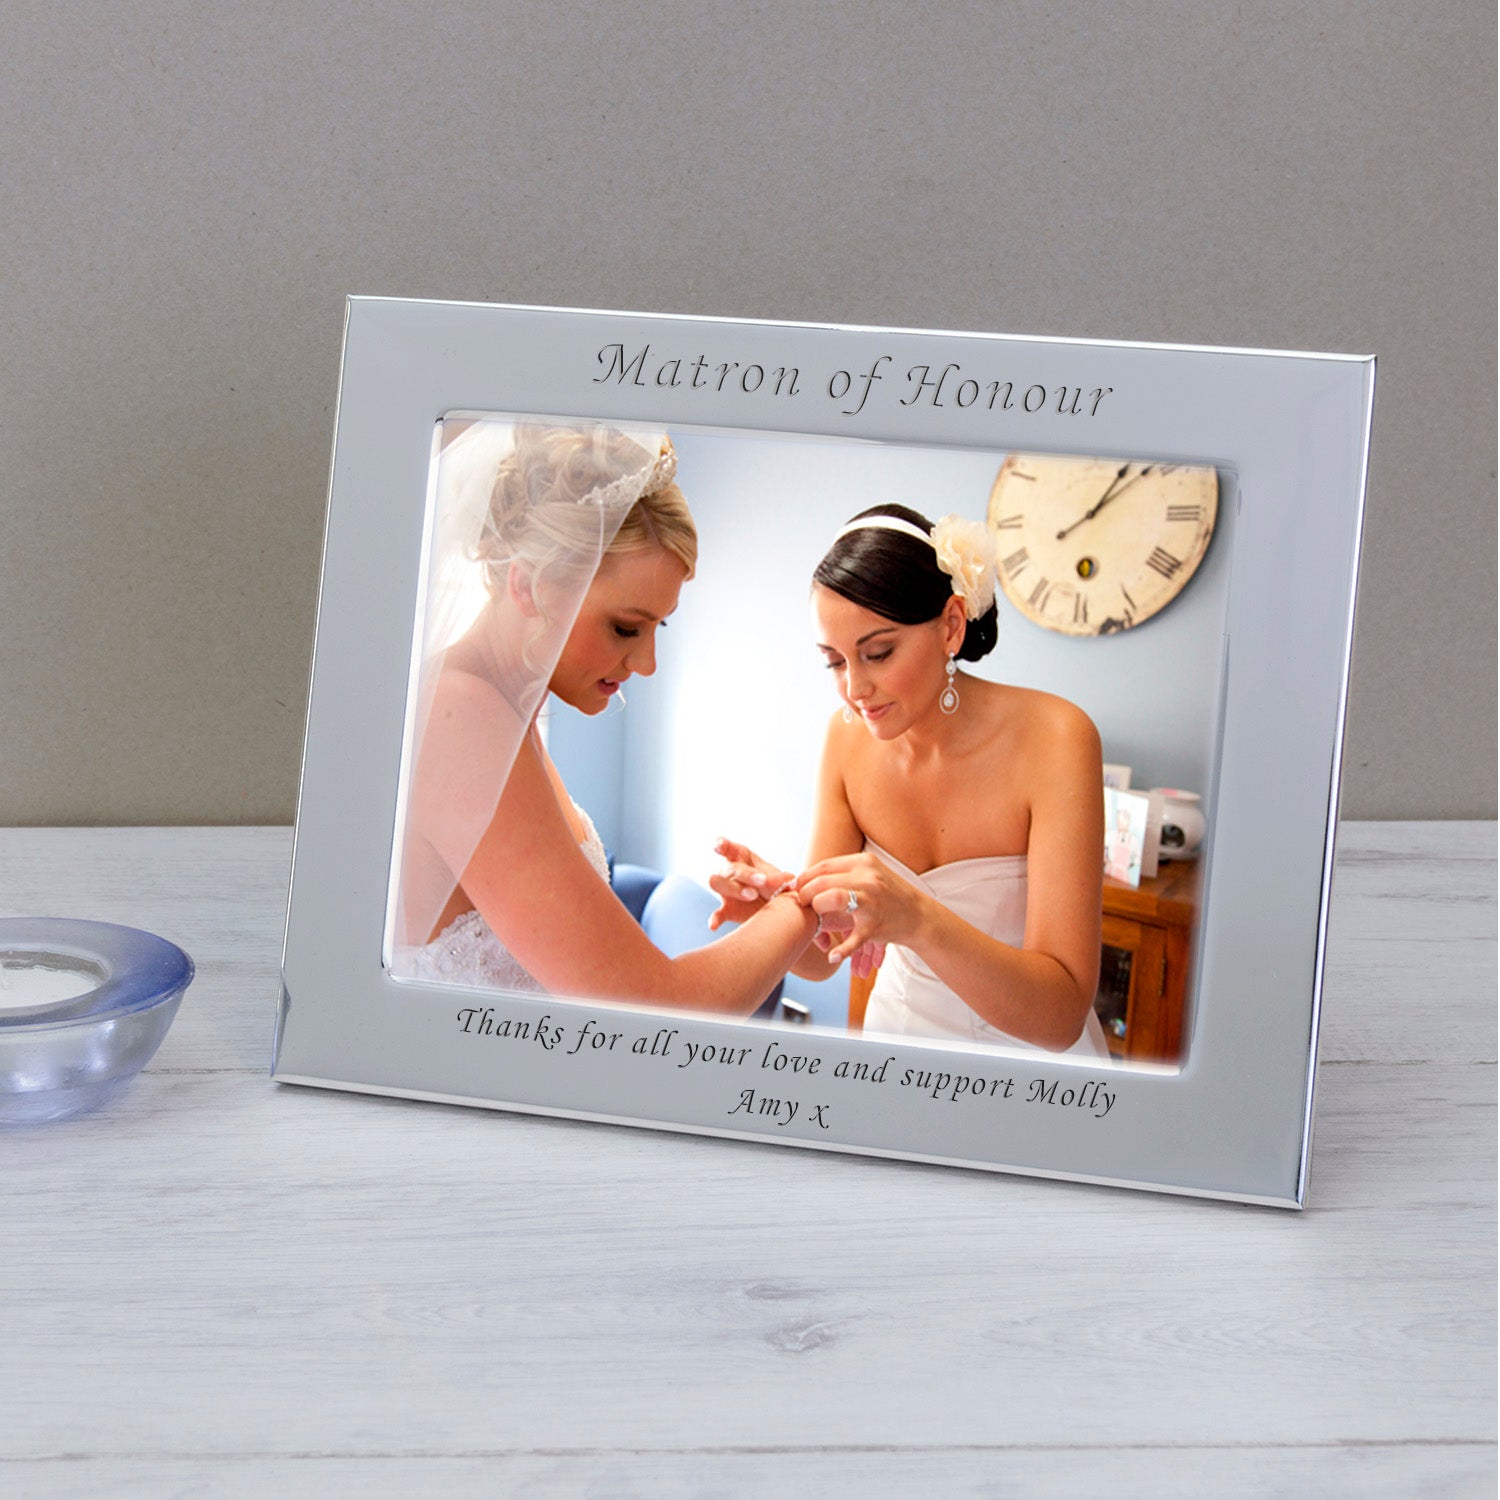 Personalised Matron of Honour Silver Plated Photo Frame